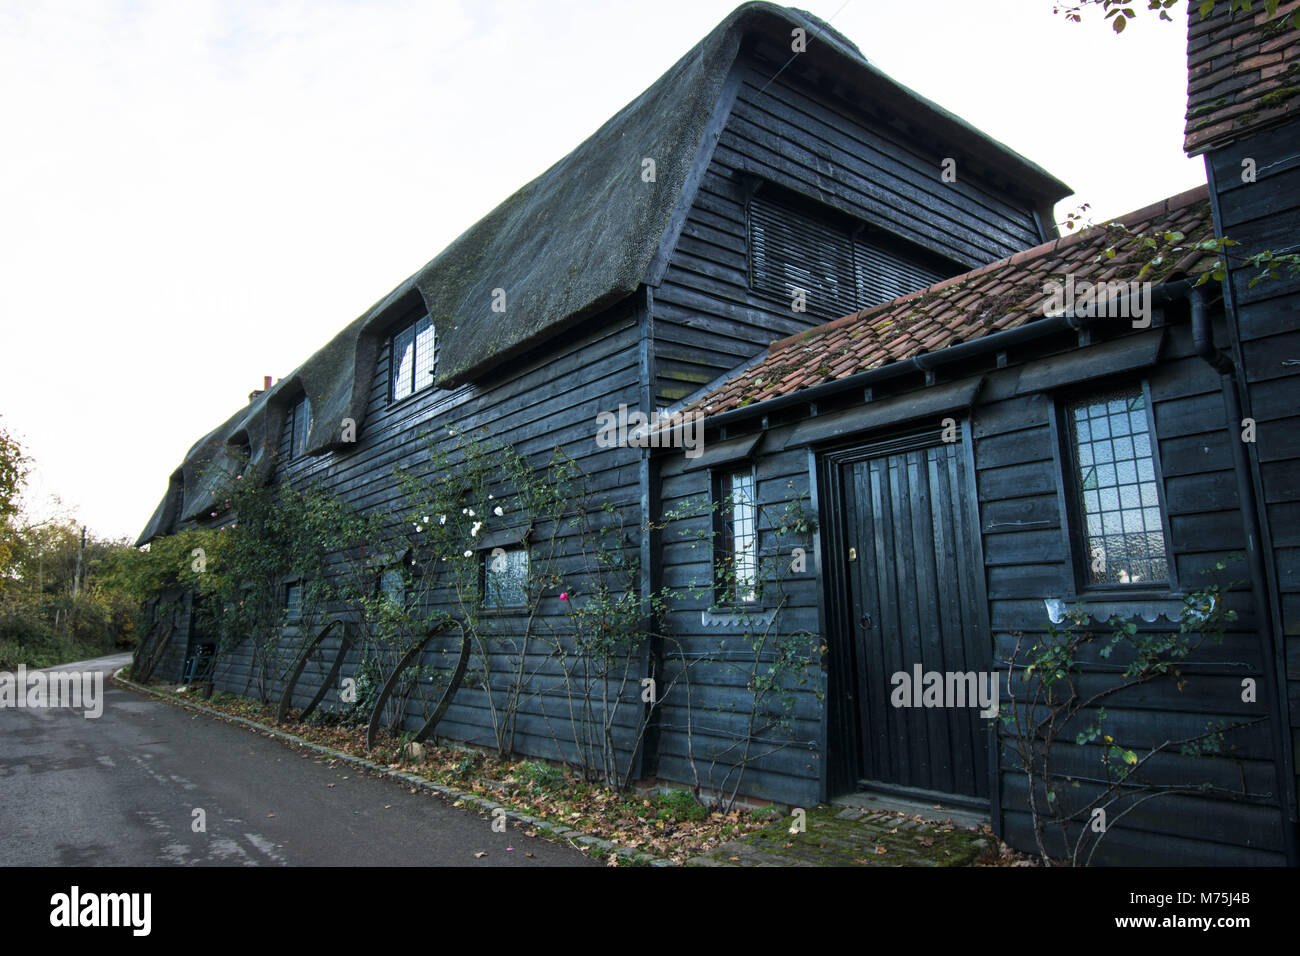 Flatford Mill old barn wood brown old ancient door wheels wheel windows ancient path farmhouse tiles pitched black painted nice village Stock Photo